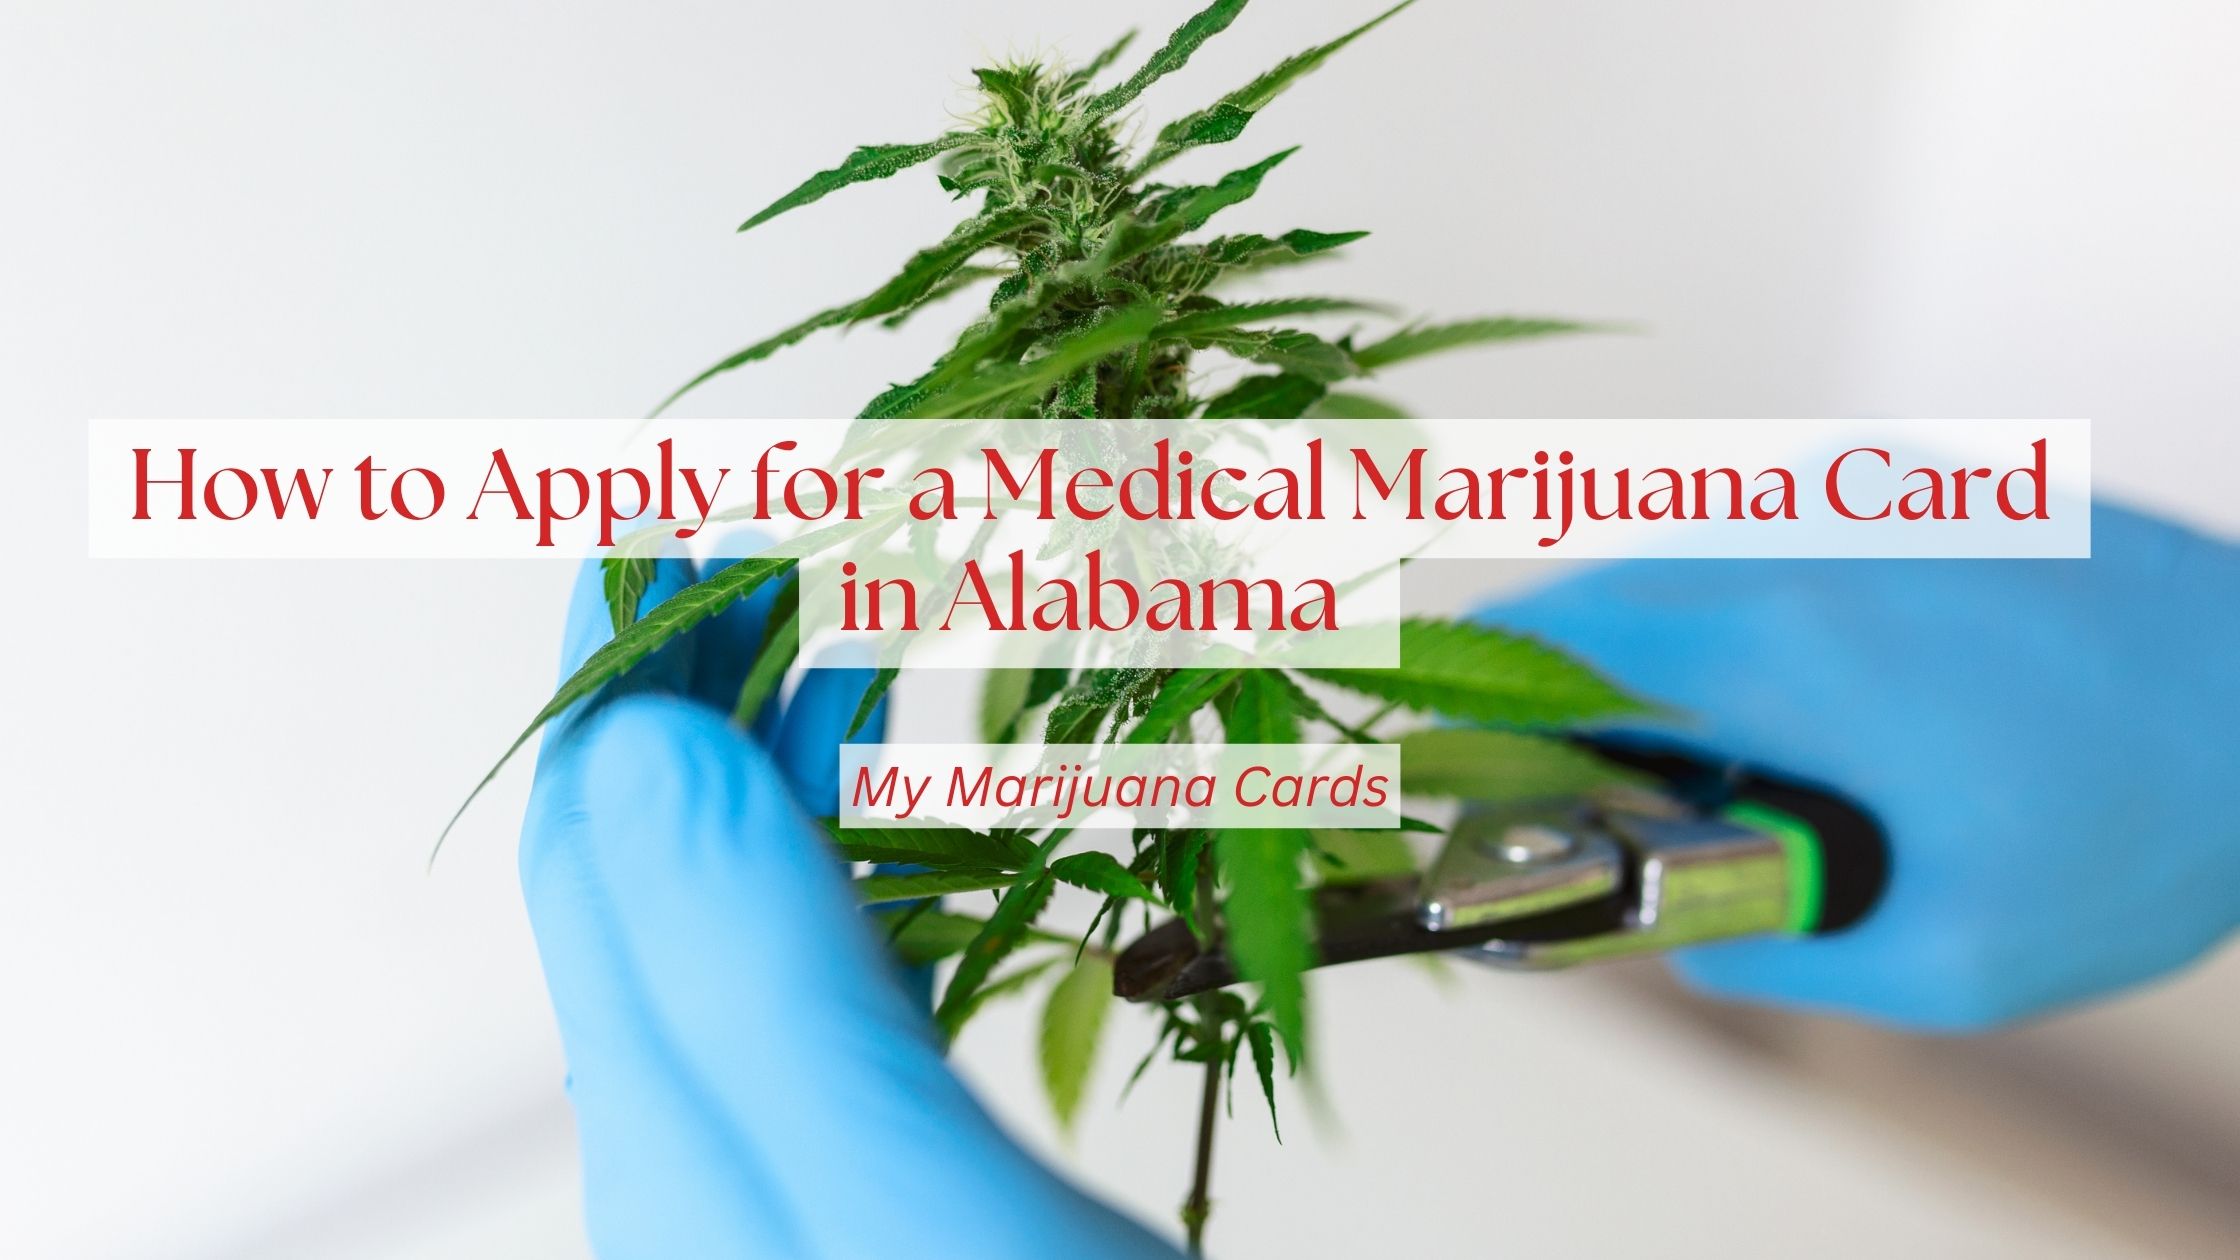 How to Apply for a Medical Marijuana Card in Alabama